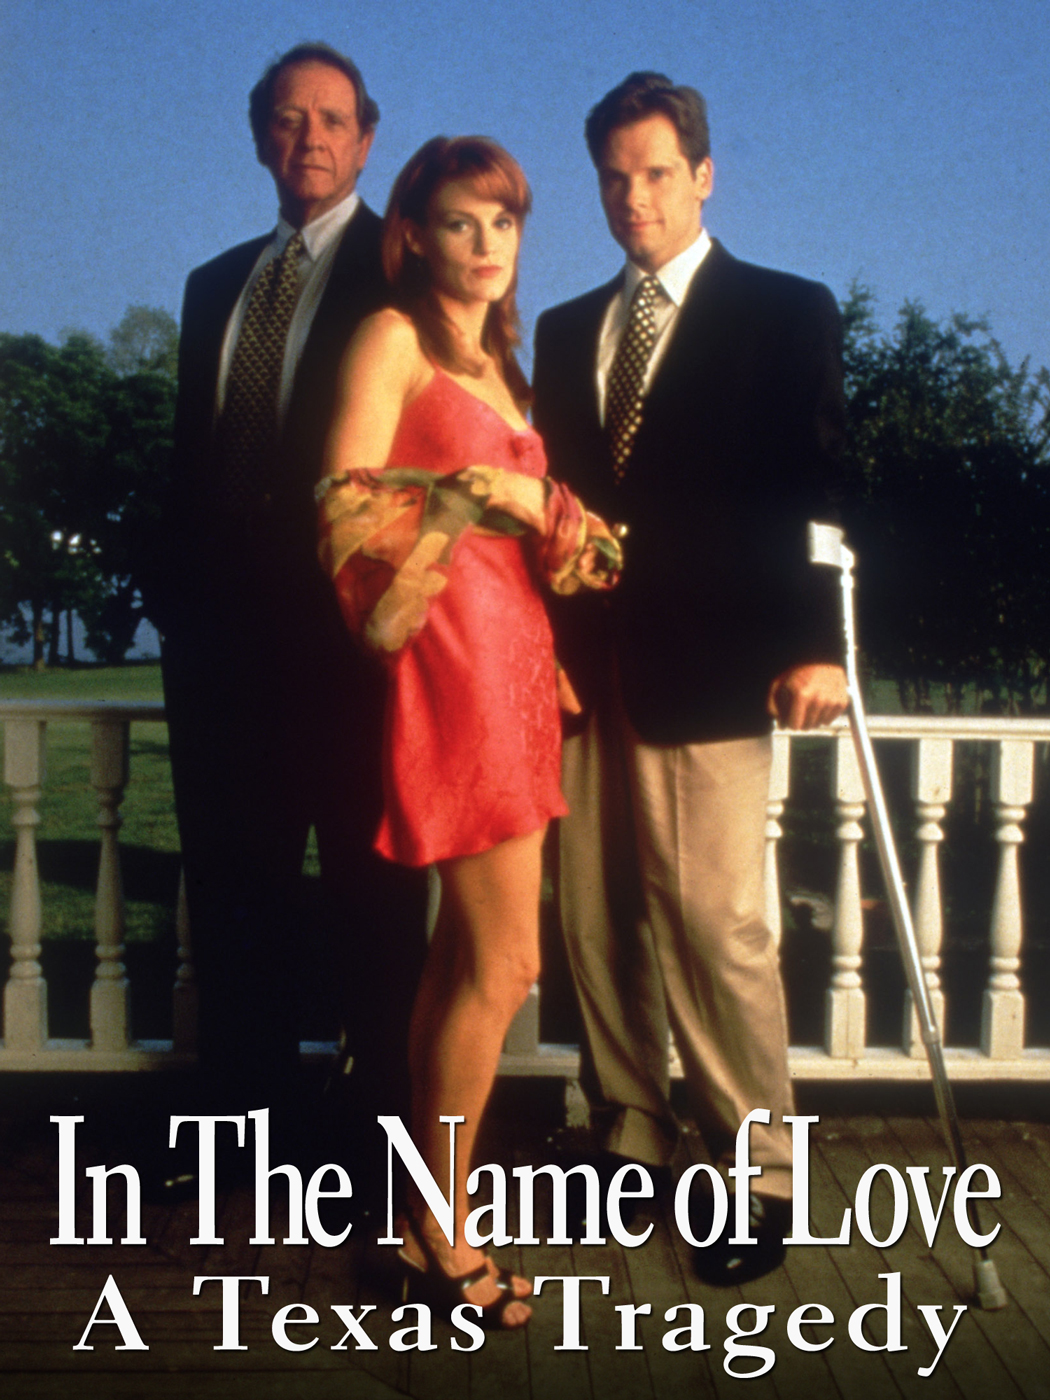 Full movie names of love the In the